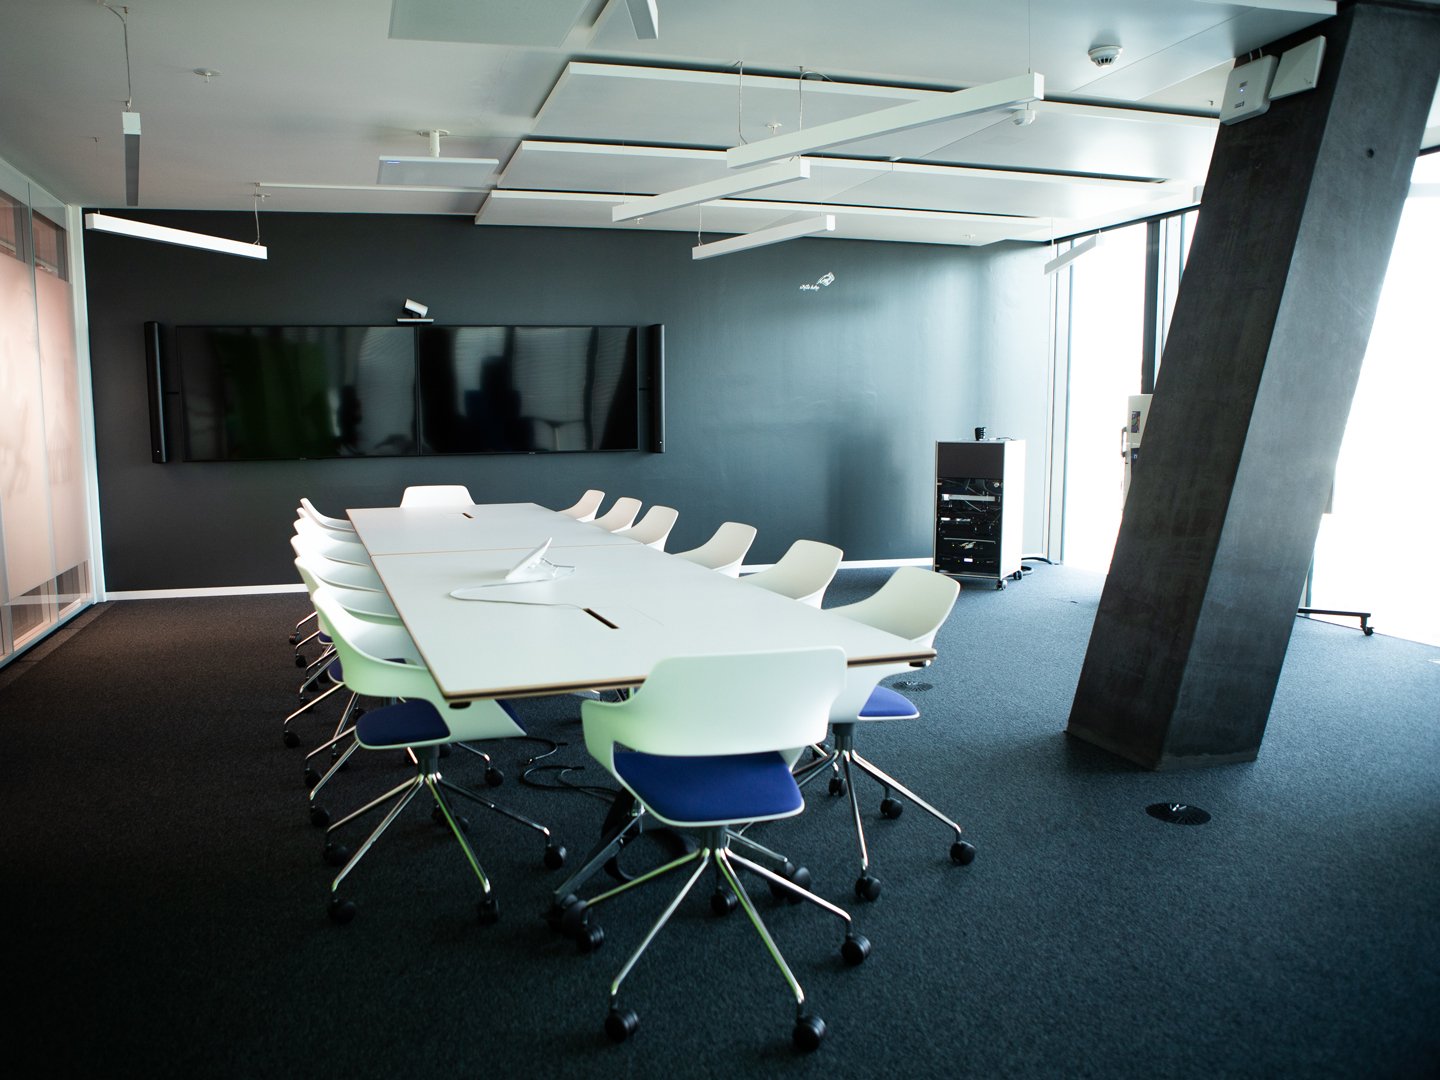 Large meeting room at Cognizant with displays and many chairs and a table